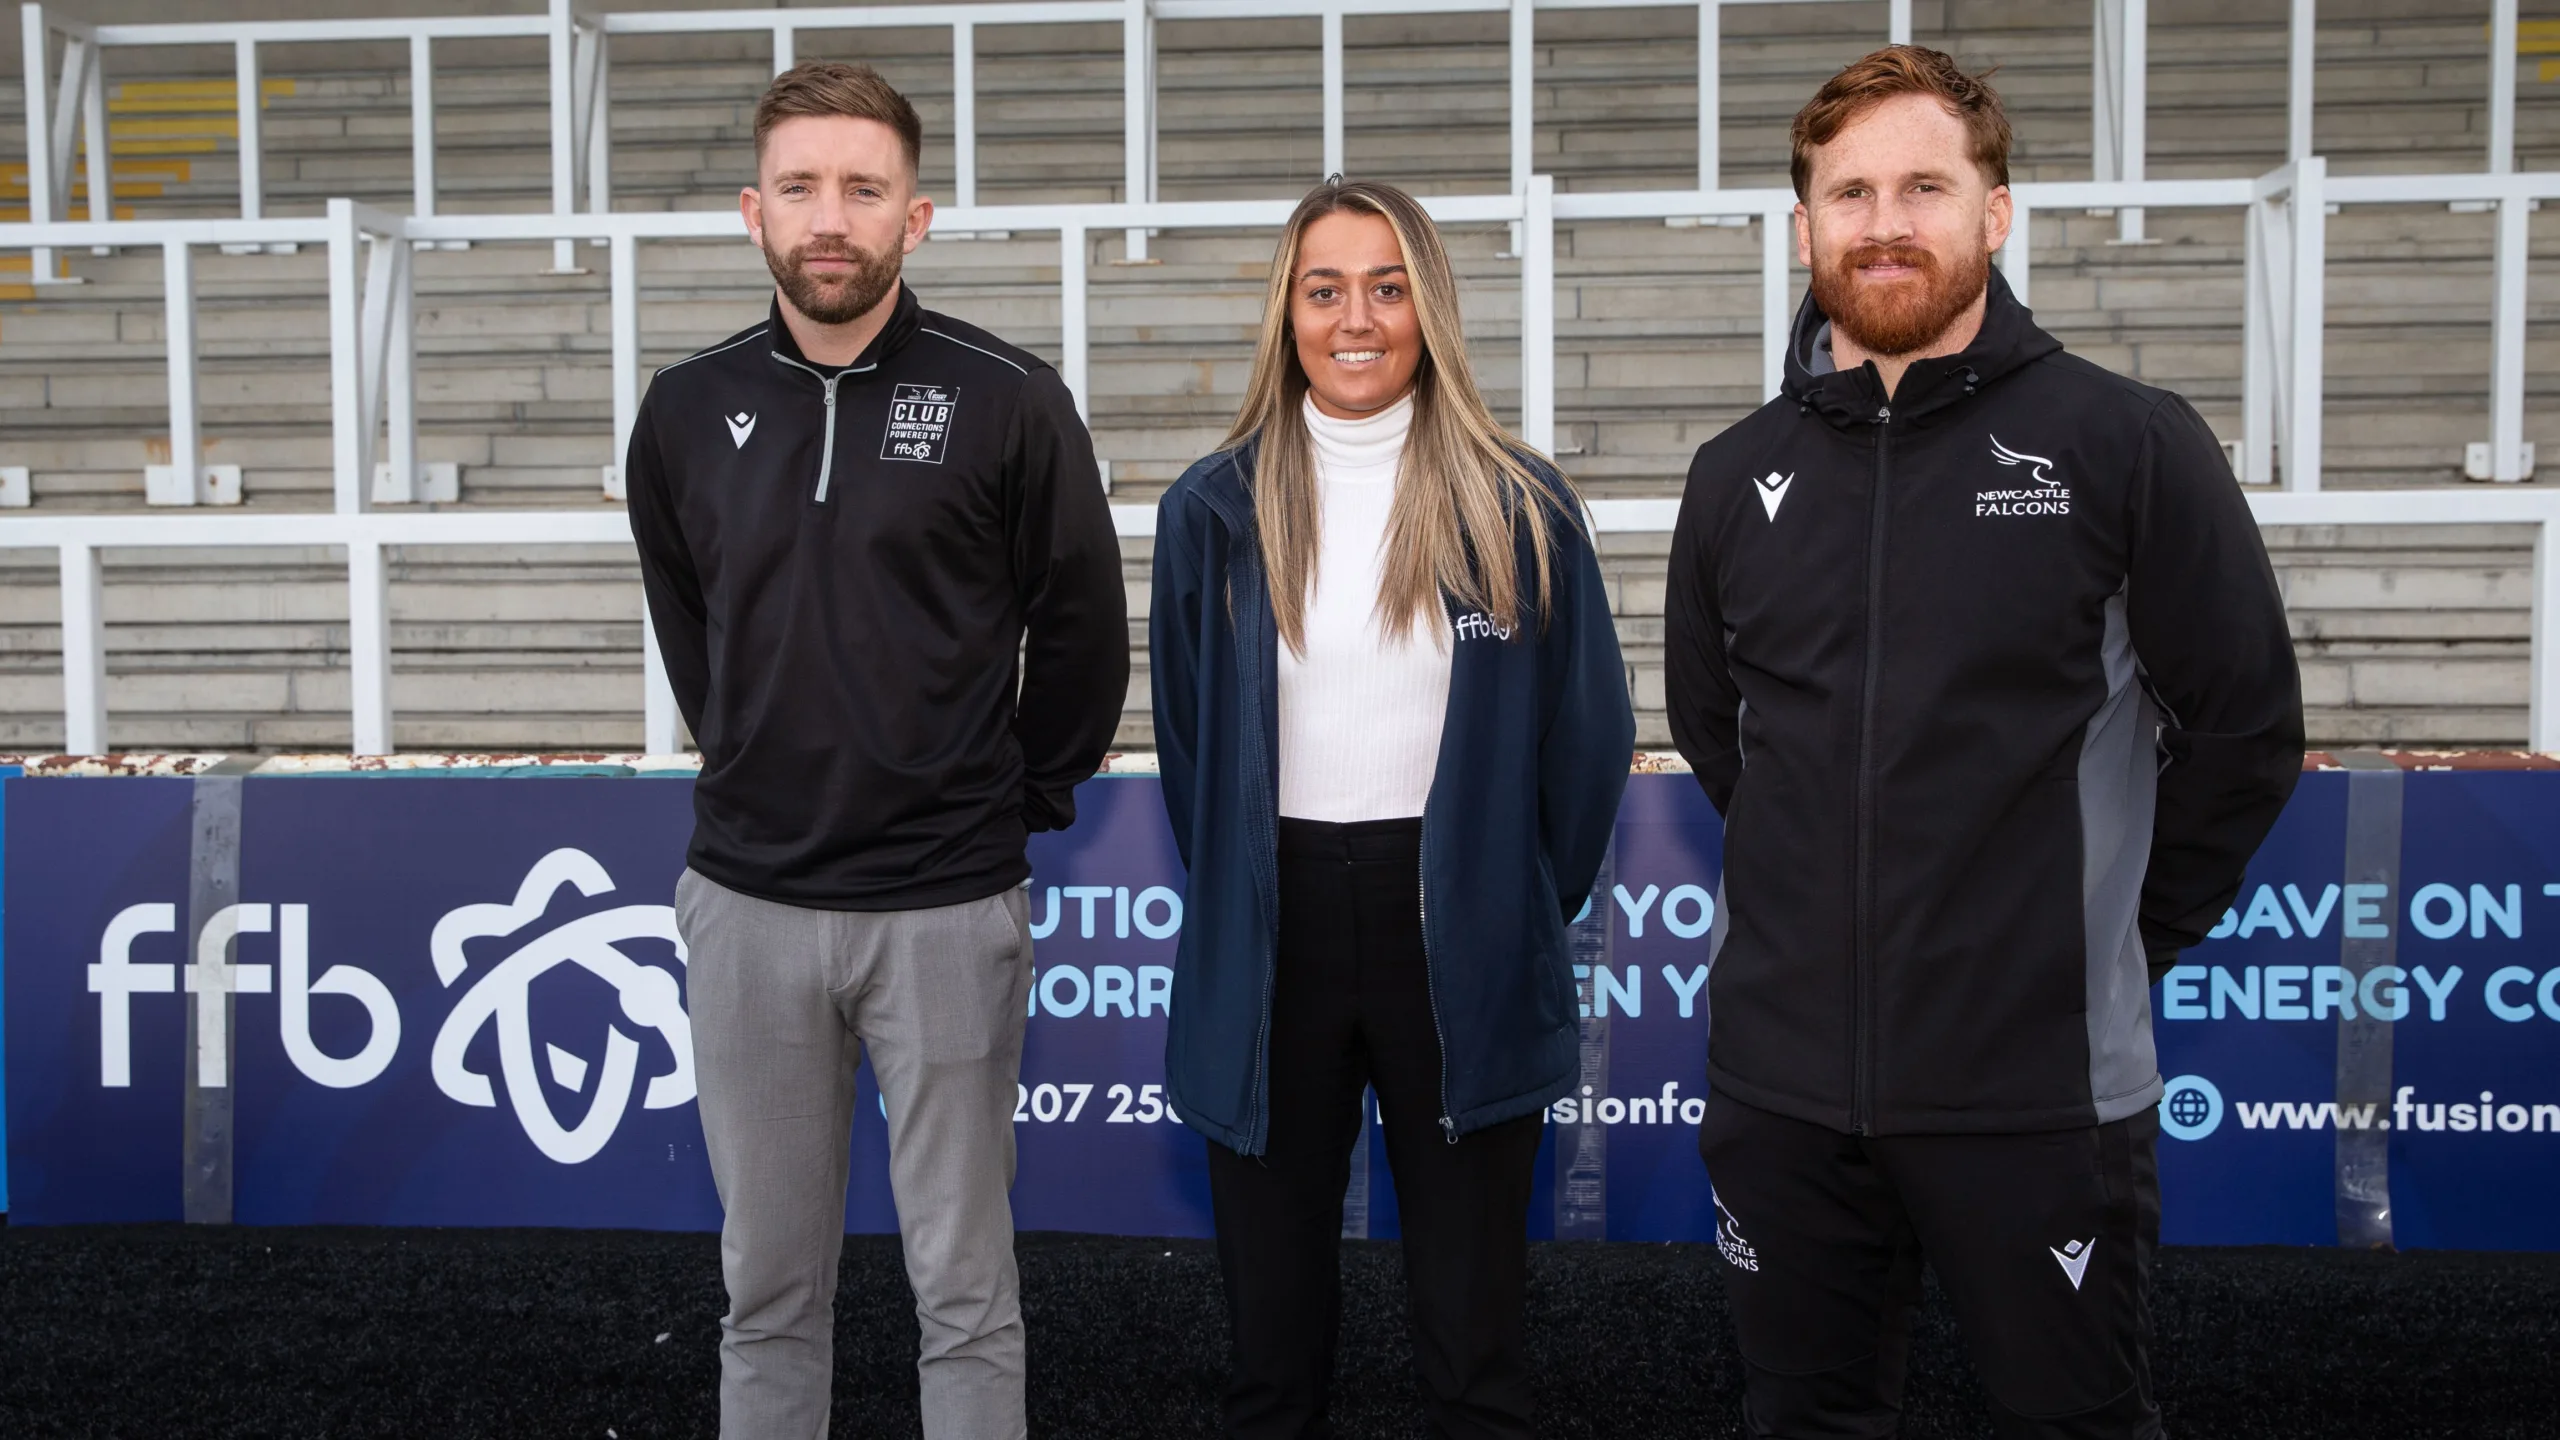 Newcastle Falcons and Fusion For Business